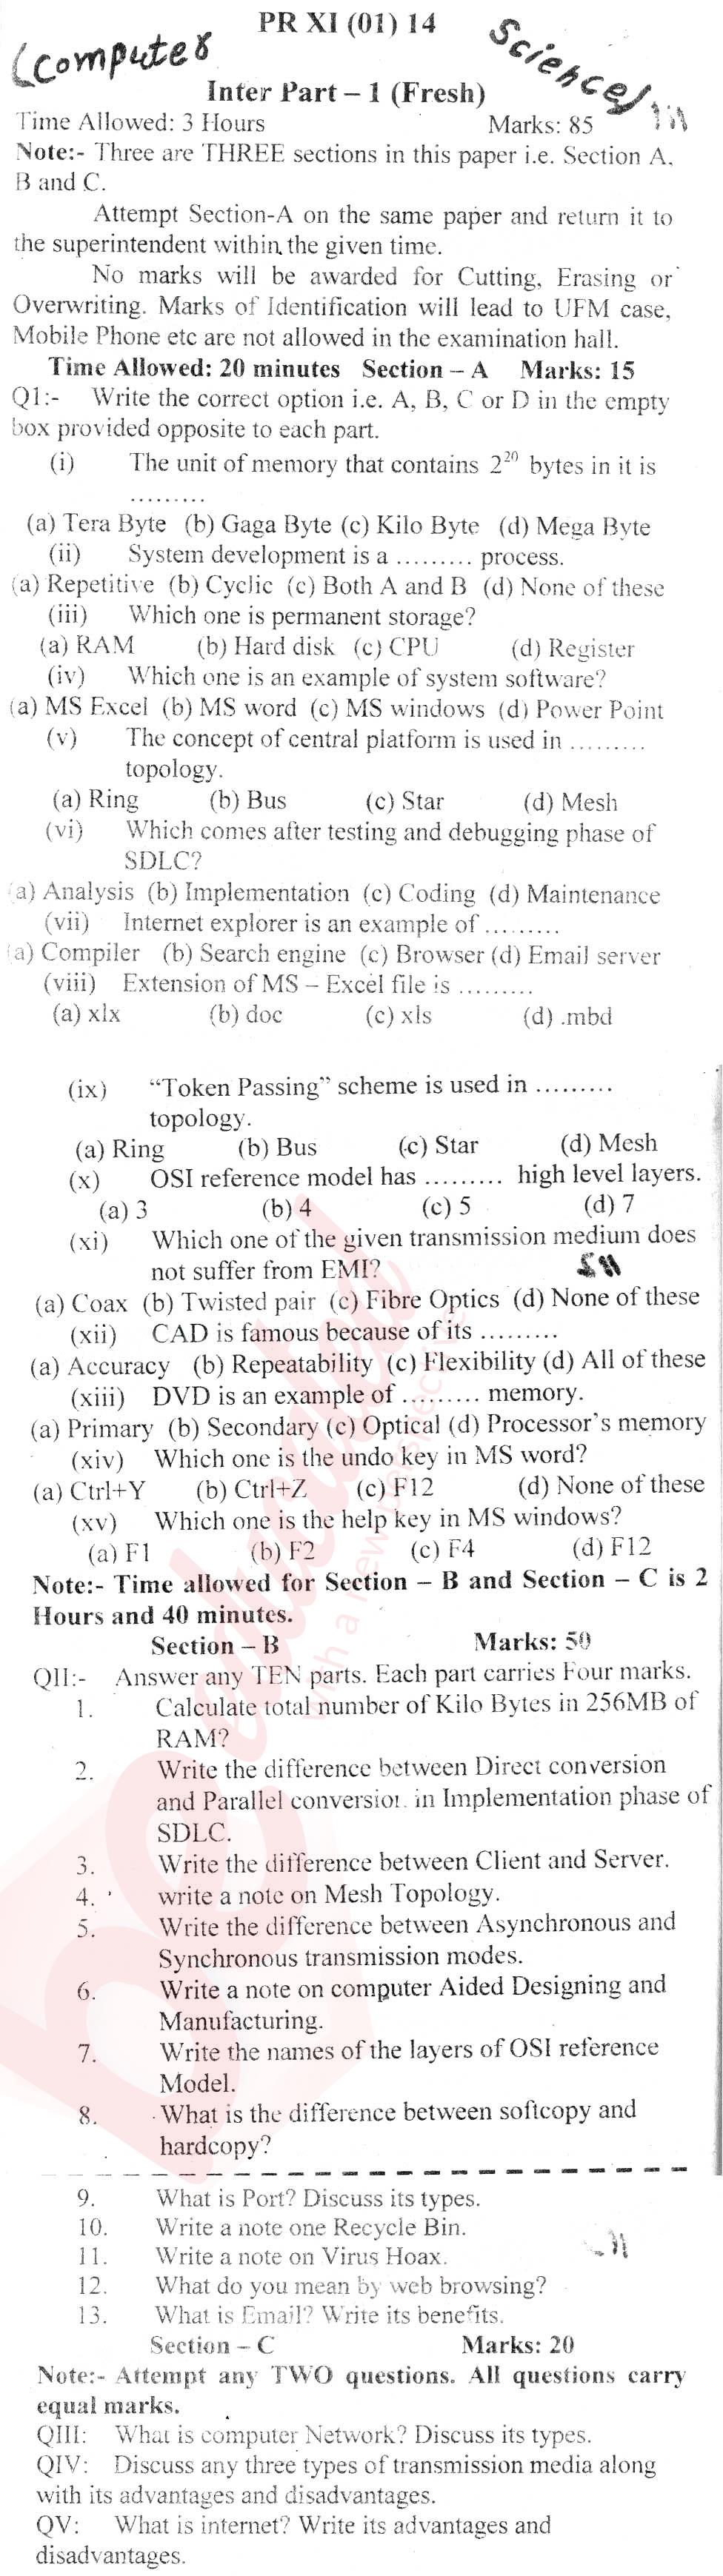 Computer Science ICS Part 1 Past Paper Group 1 BISE Bannu 2014